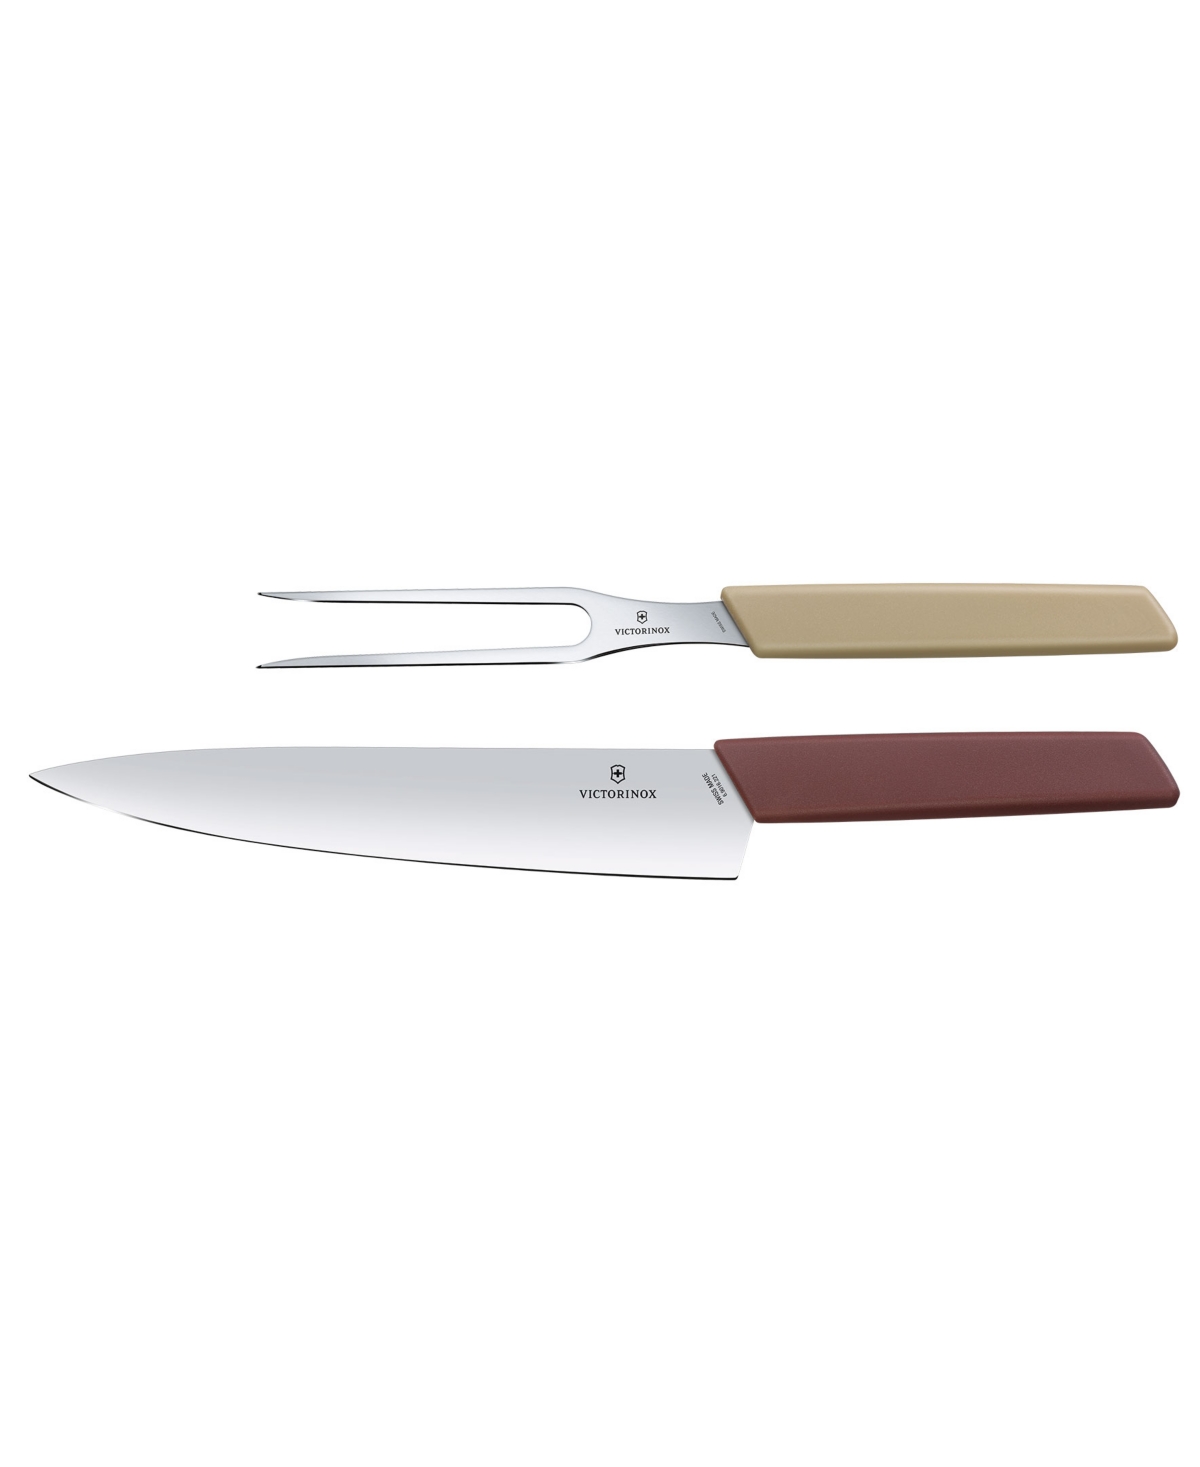 Victorinox Stainless Steel 2 Piece Carving Set In Assorted